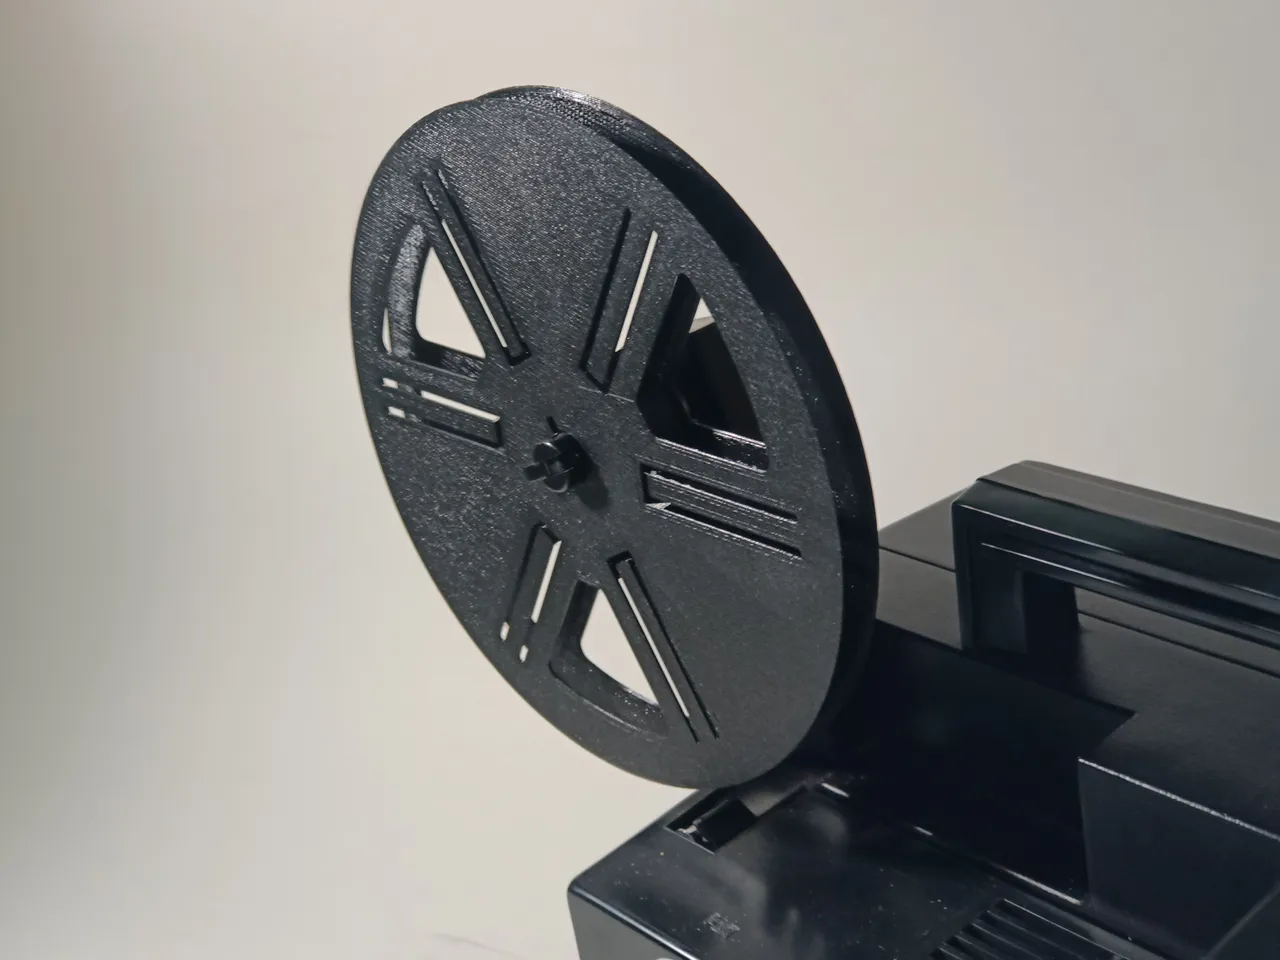 8mm/Super8 Film Projector Reel - Autoloading by Adasf